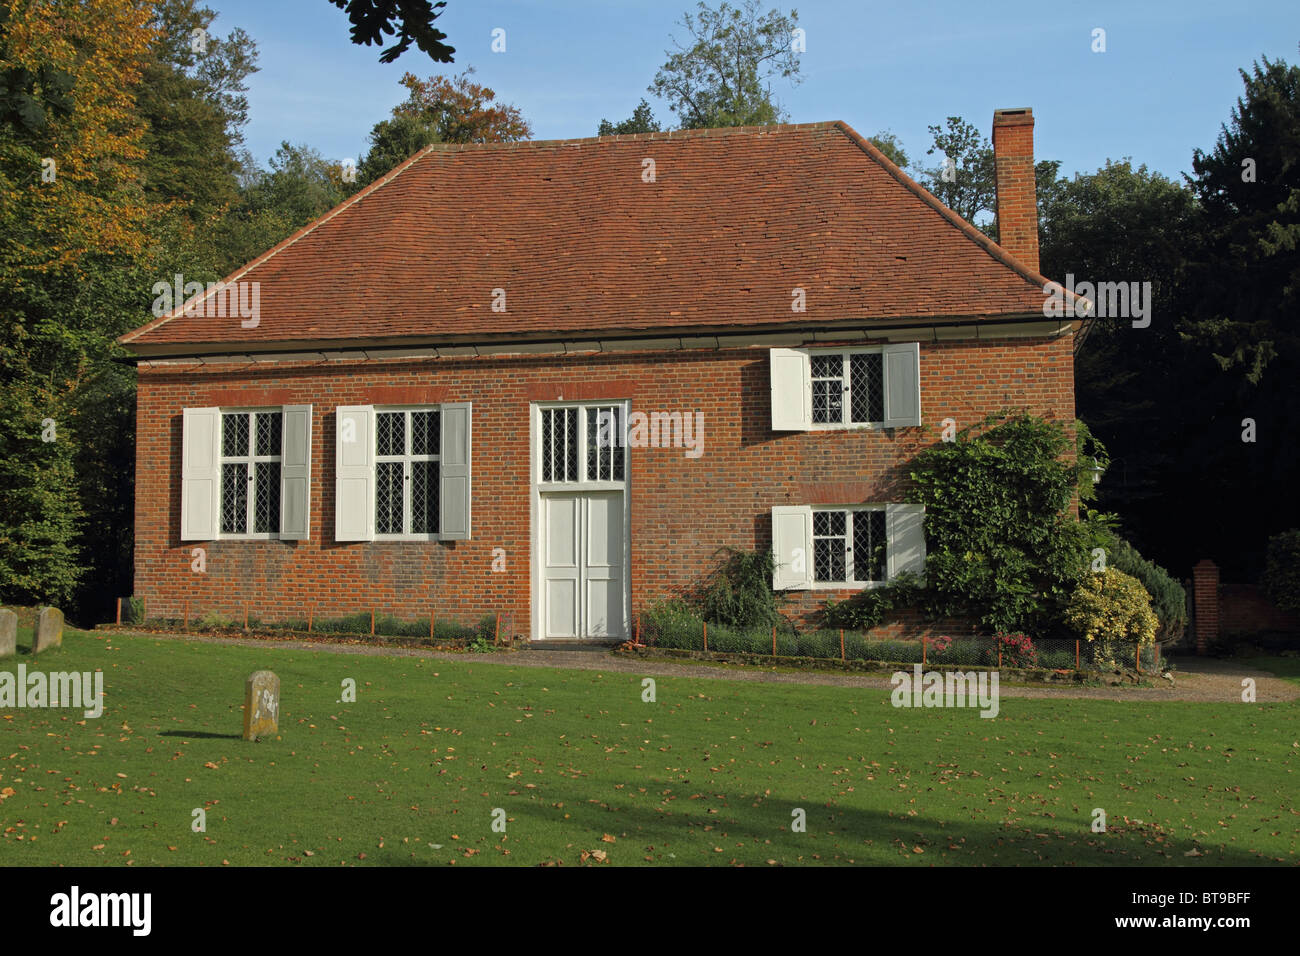 Friends Meeting House, Jordans, Buckinghamshire, England. William Penn is buried here. Famous Quaker connections. Stock Photo